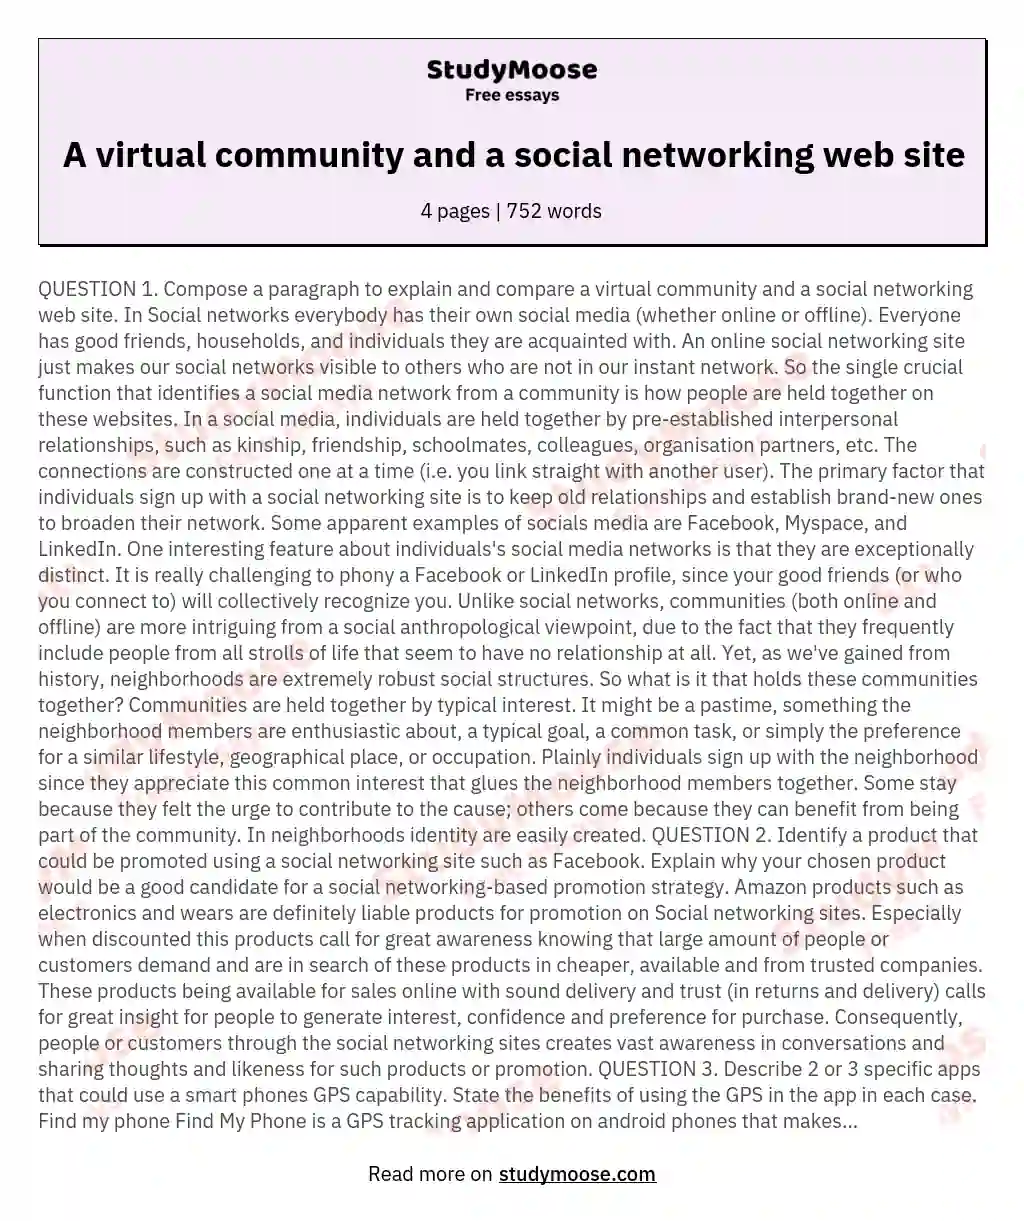 A virtual community and a social networking web site essay